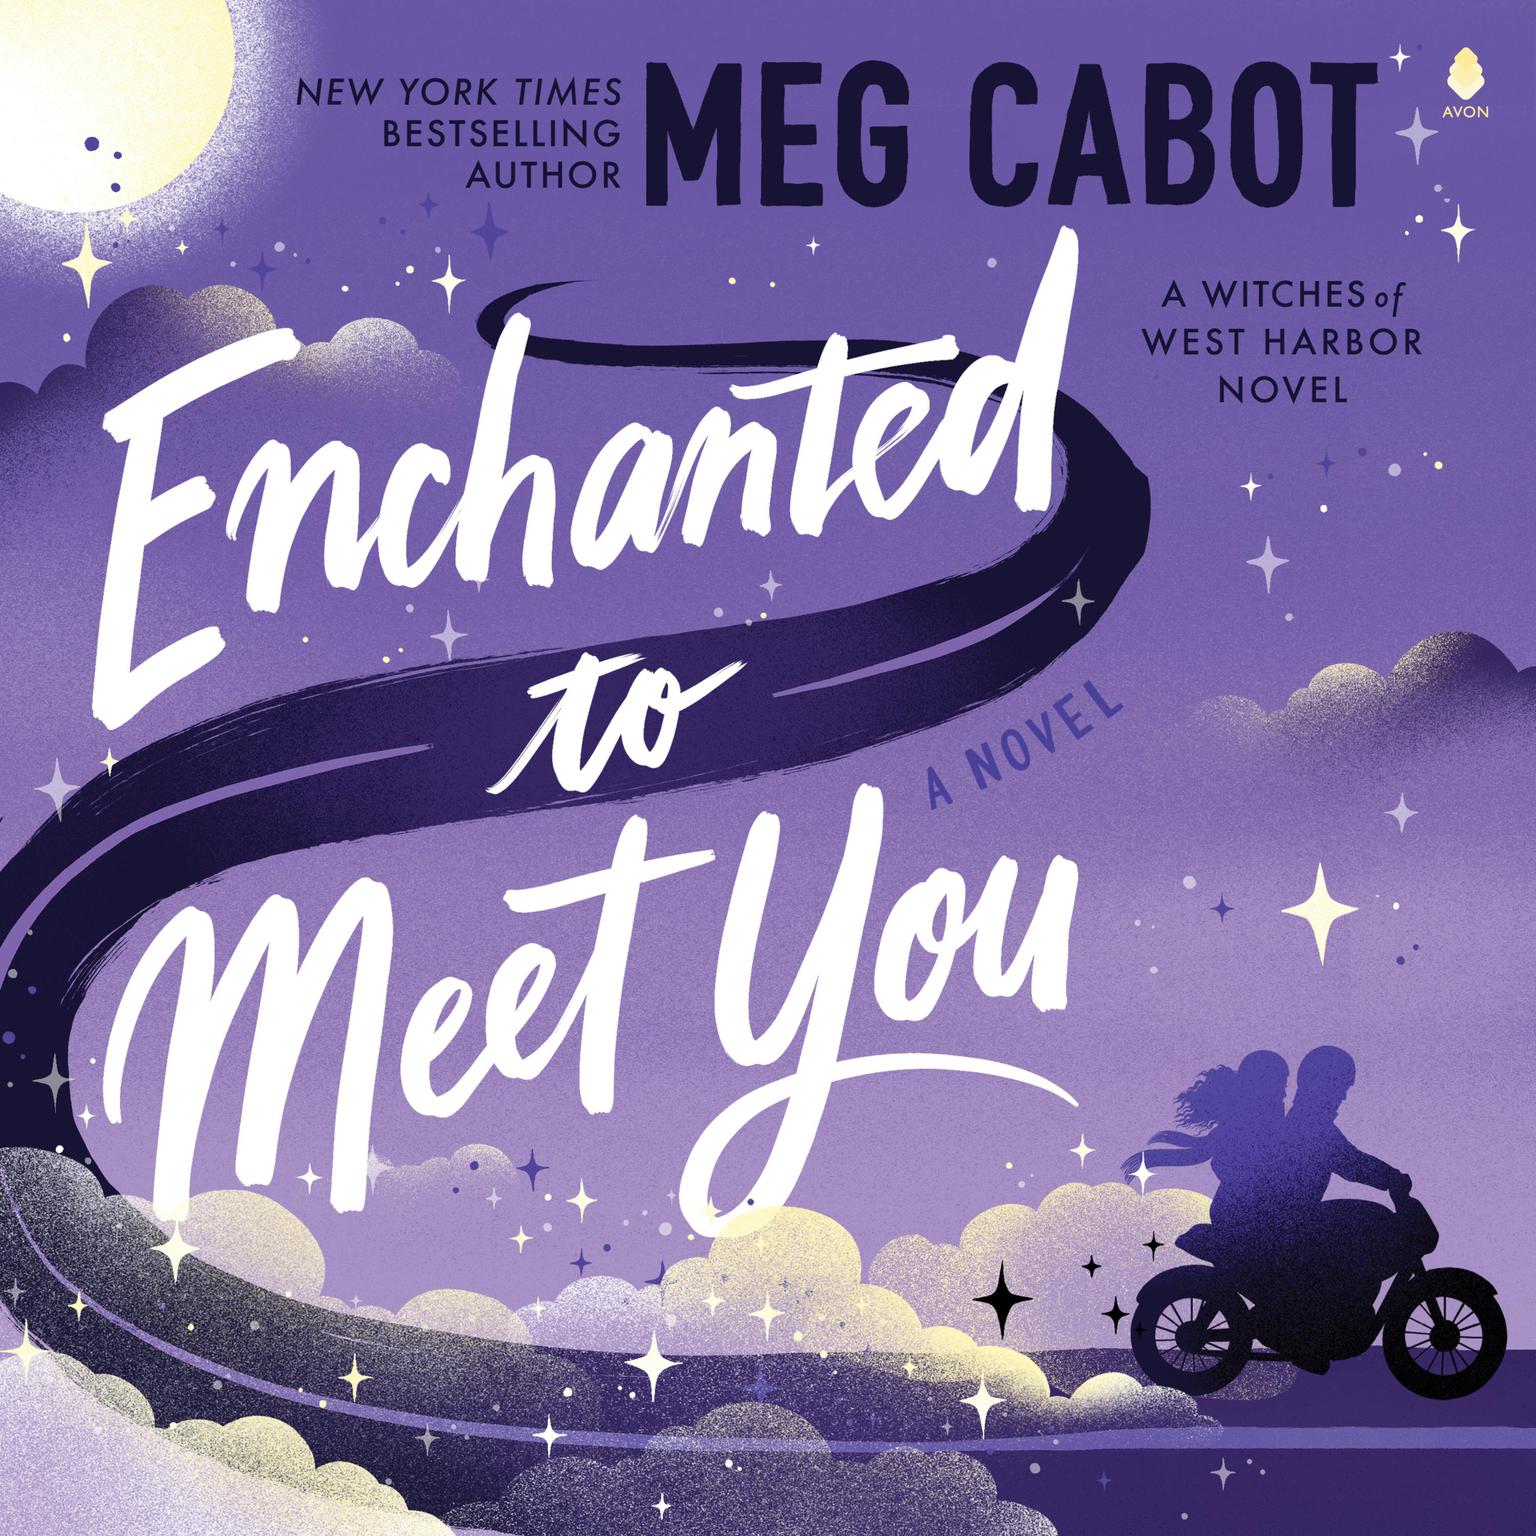 Enchanted to Meet You: A Witches of West Harbor Novel Audiobook, by Meg Cabot